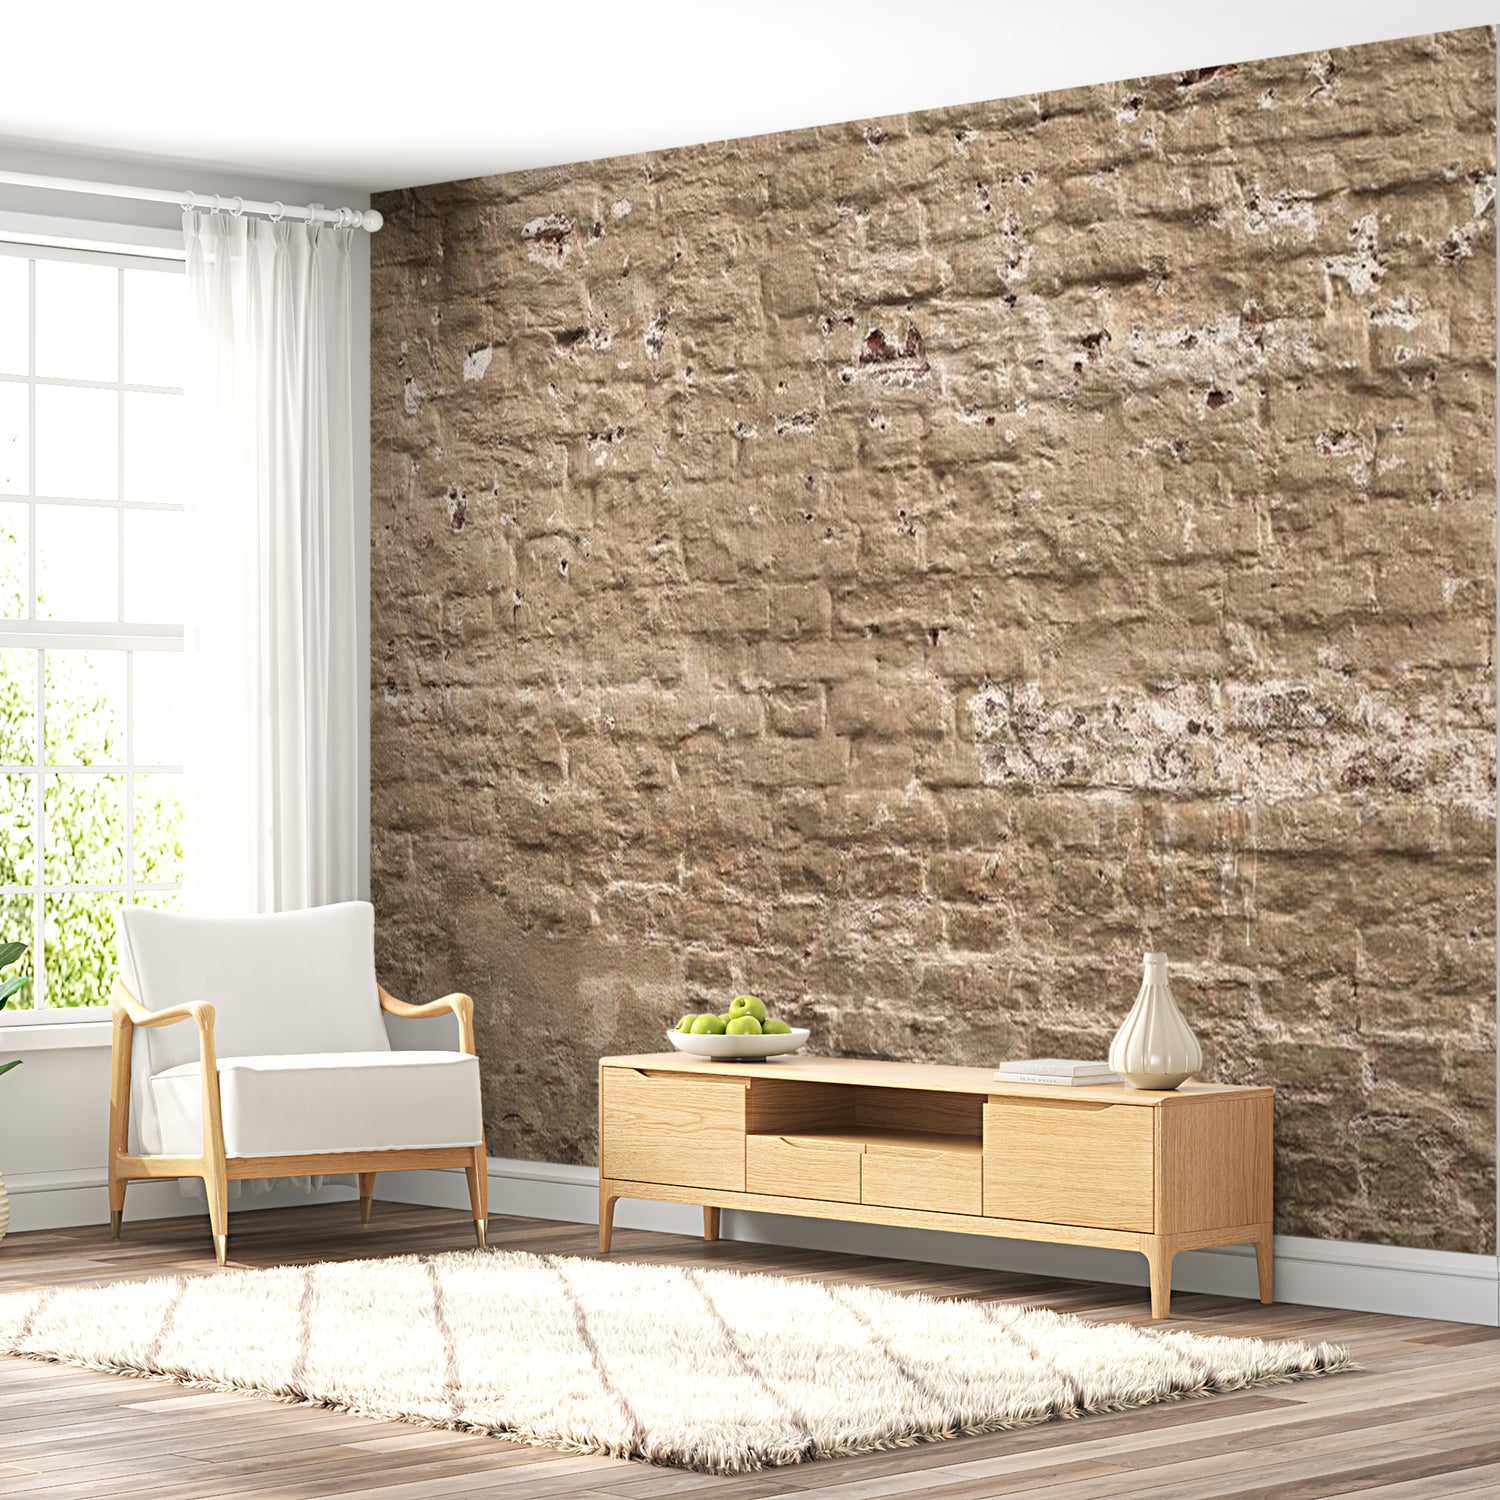 Peel & Stick Wall Mural - Beige Brick Wall - Removable Wall Decals